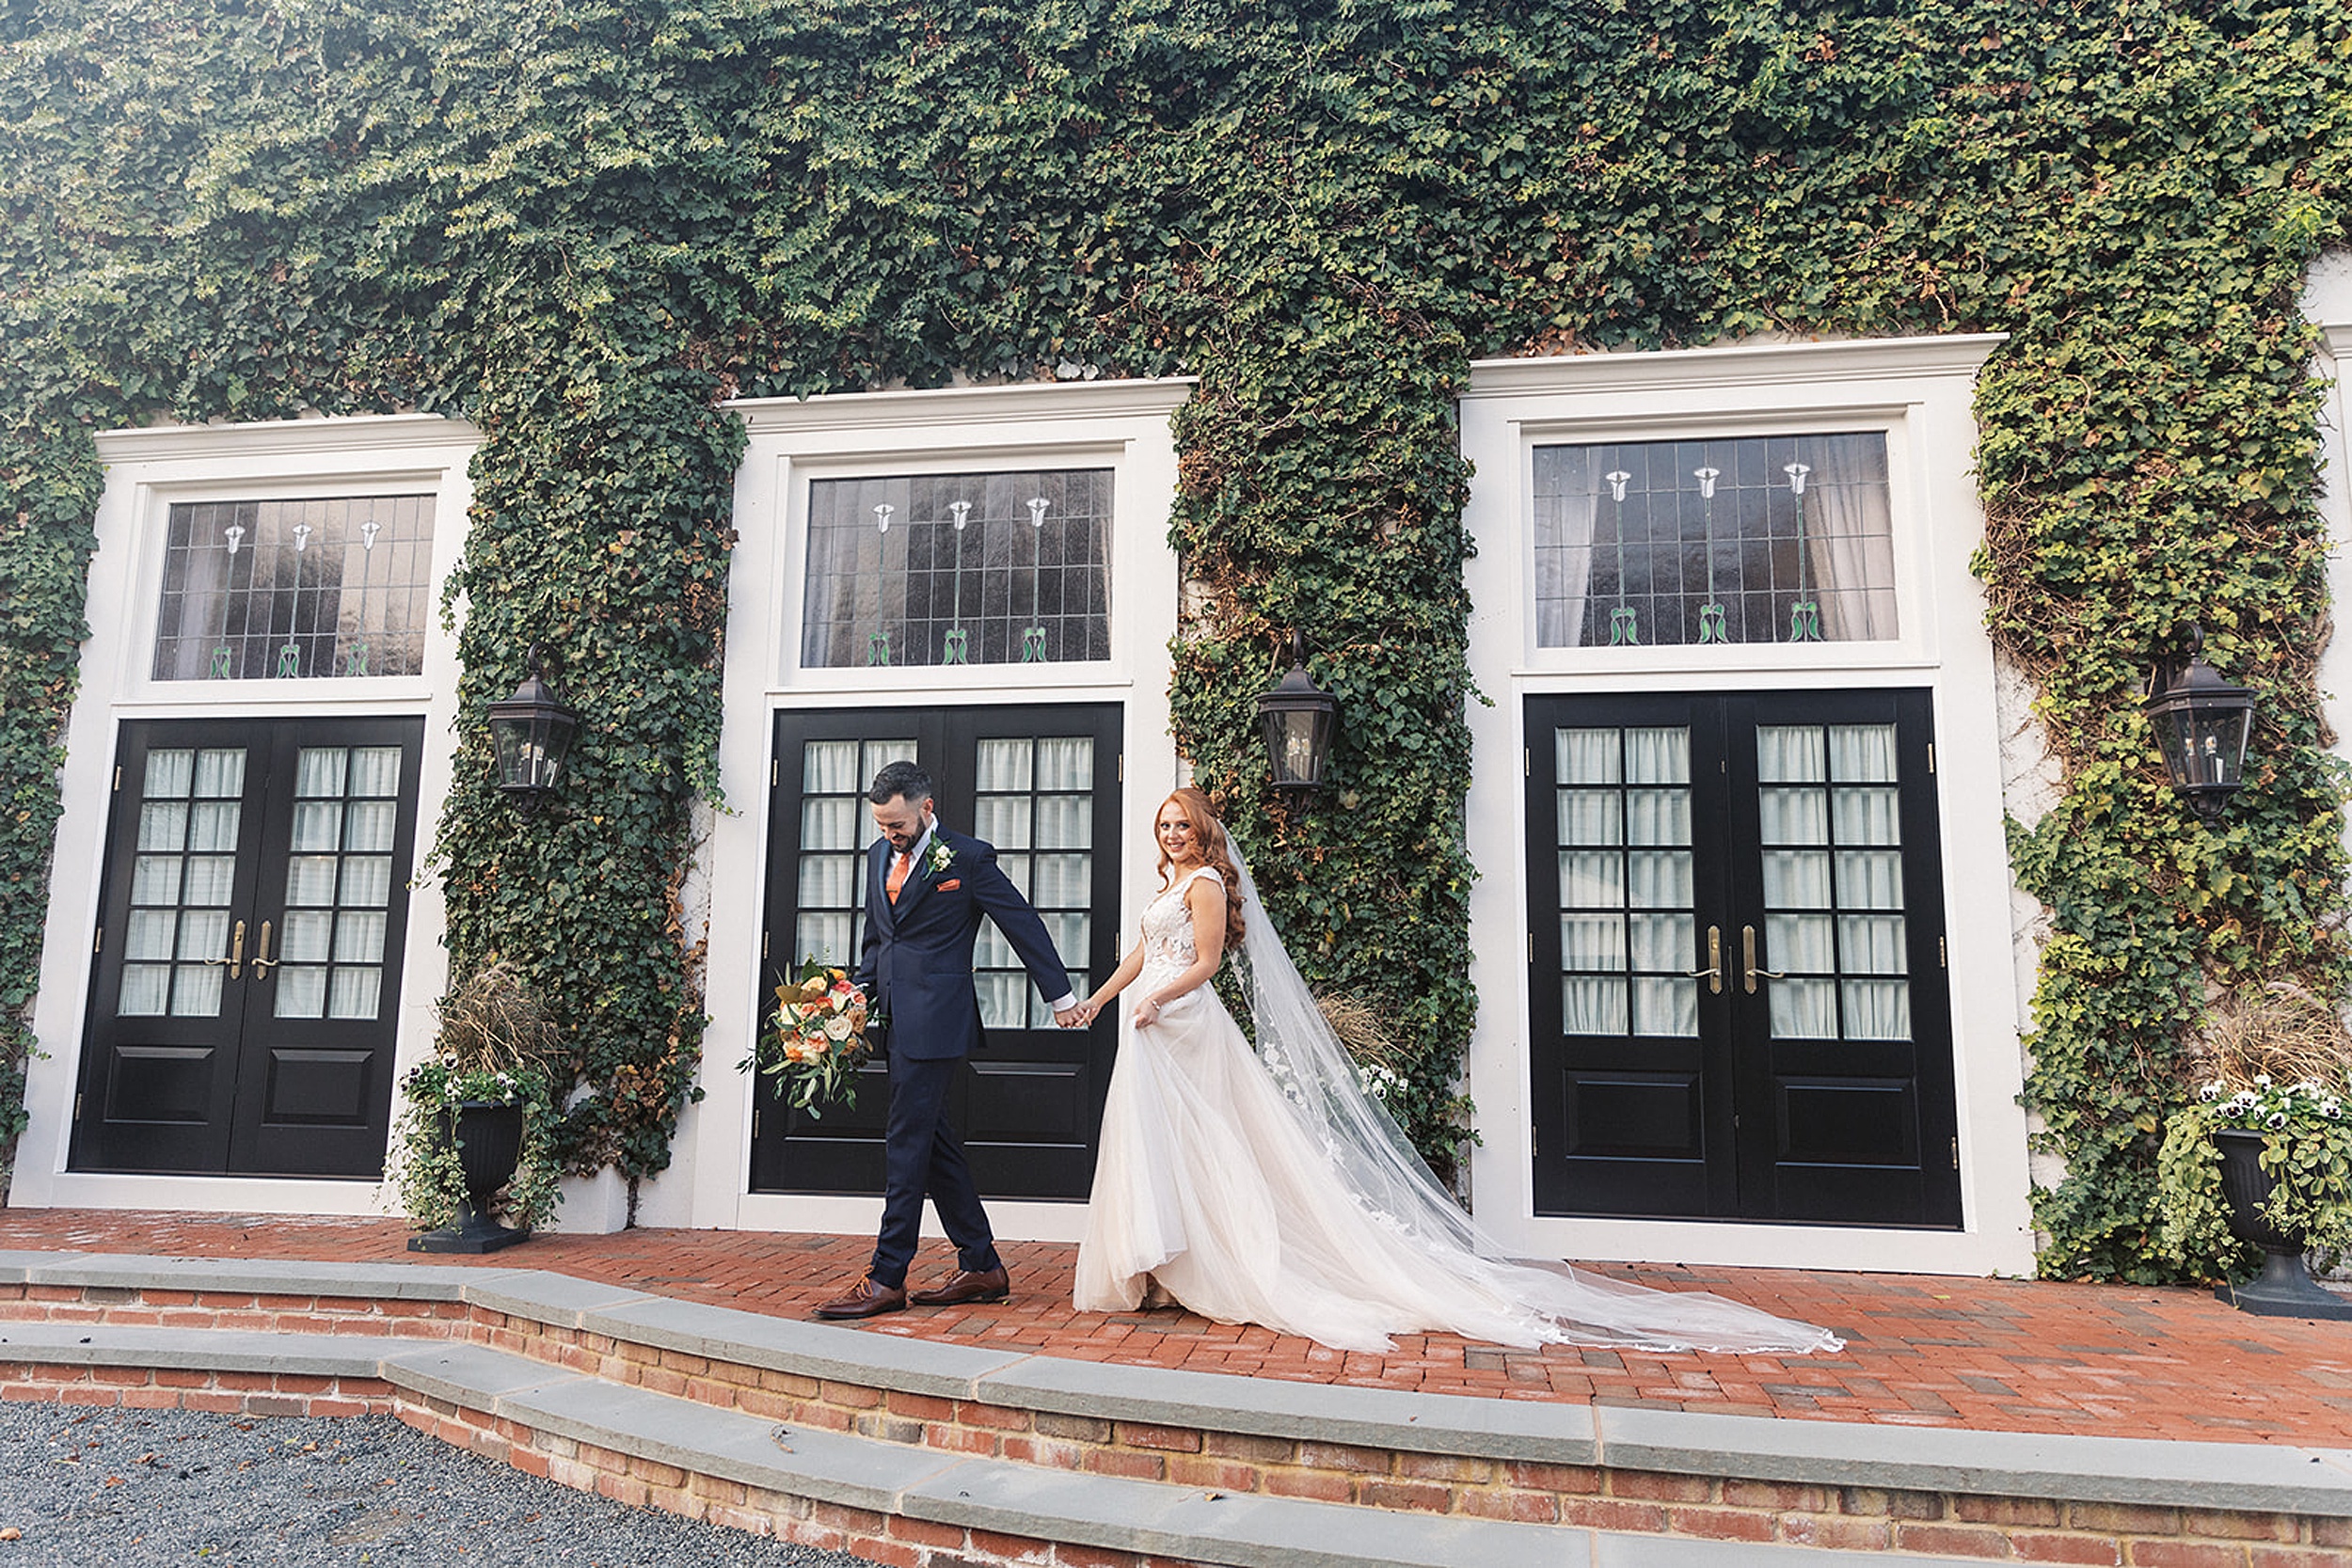 A groom leads his bride down a brick path in front of an ivy covered building at a David’s Country Inn Wedding